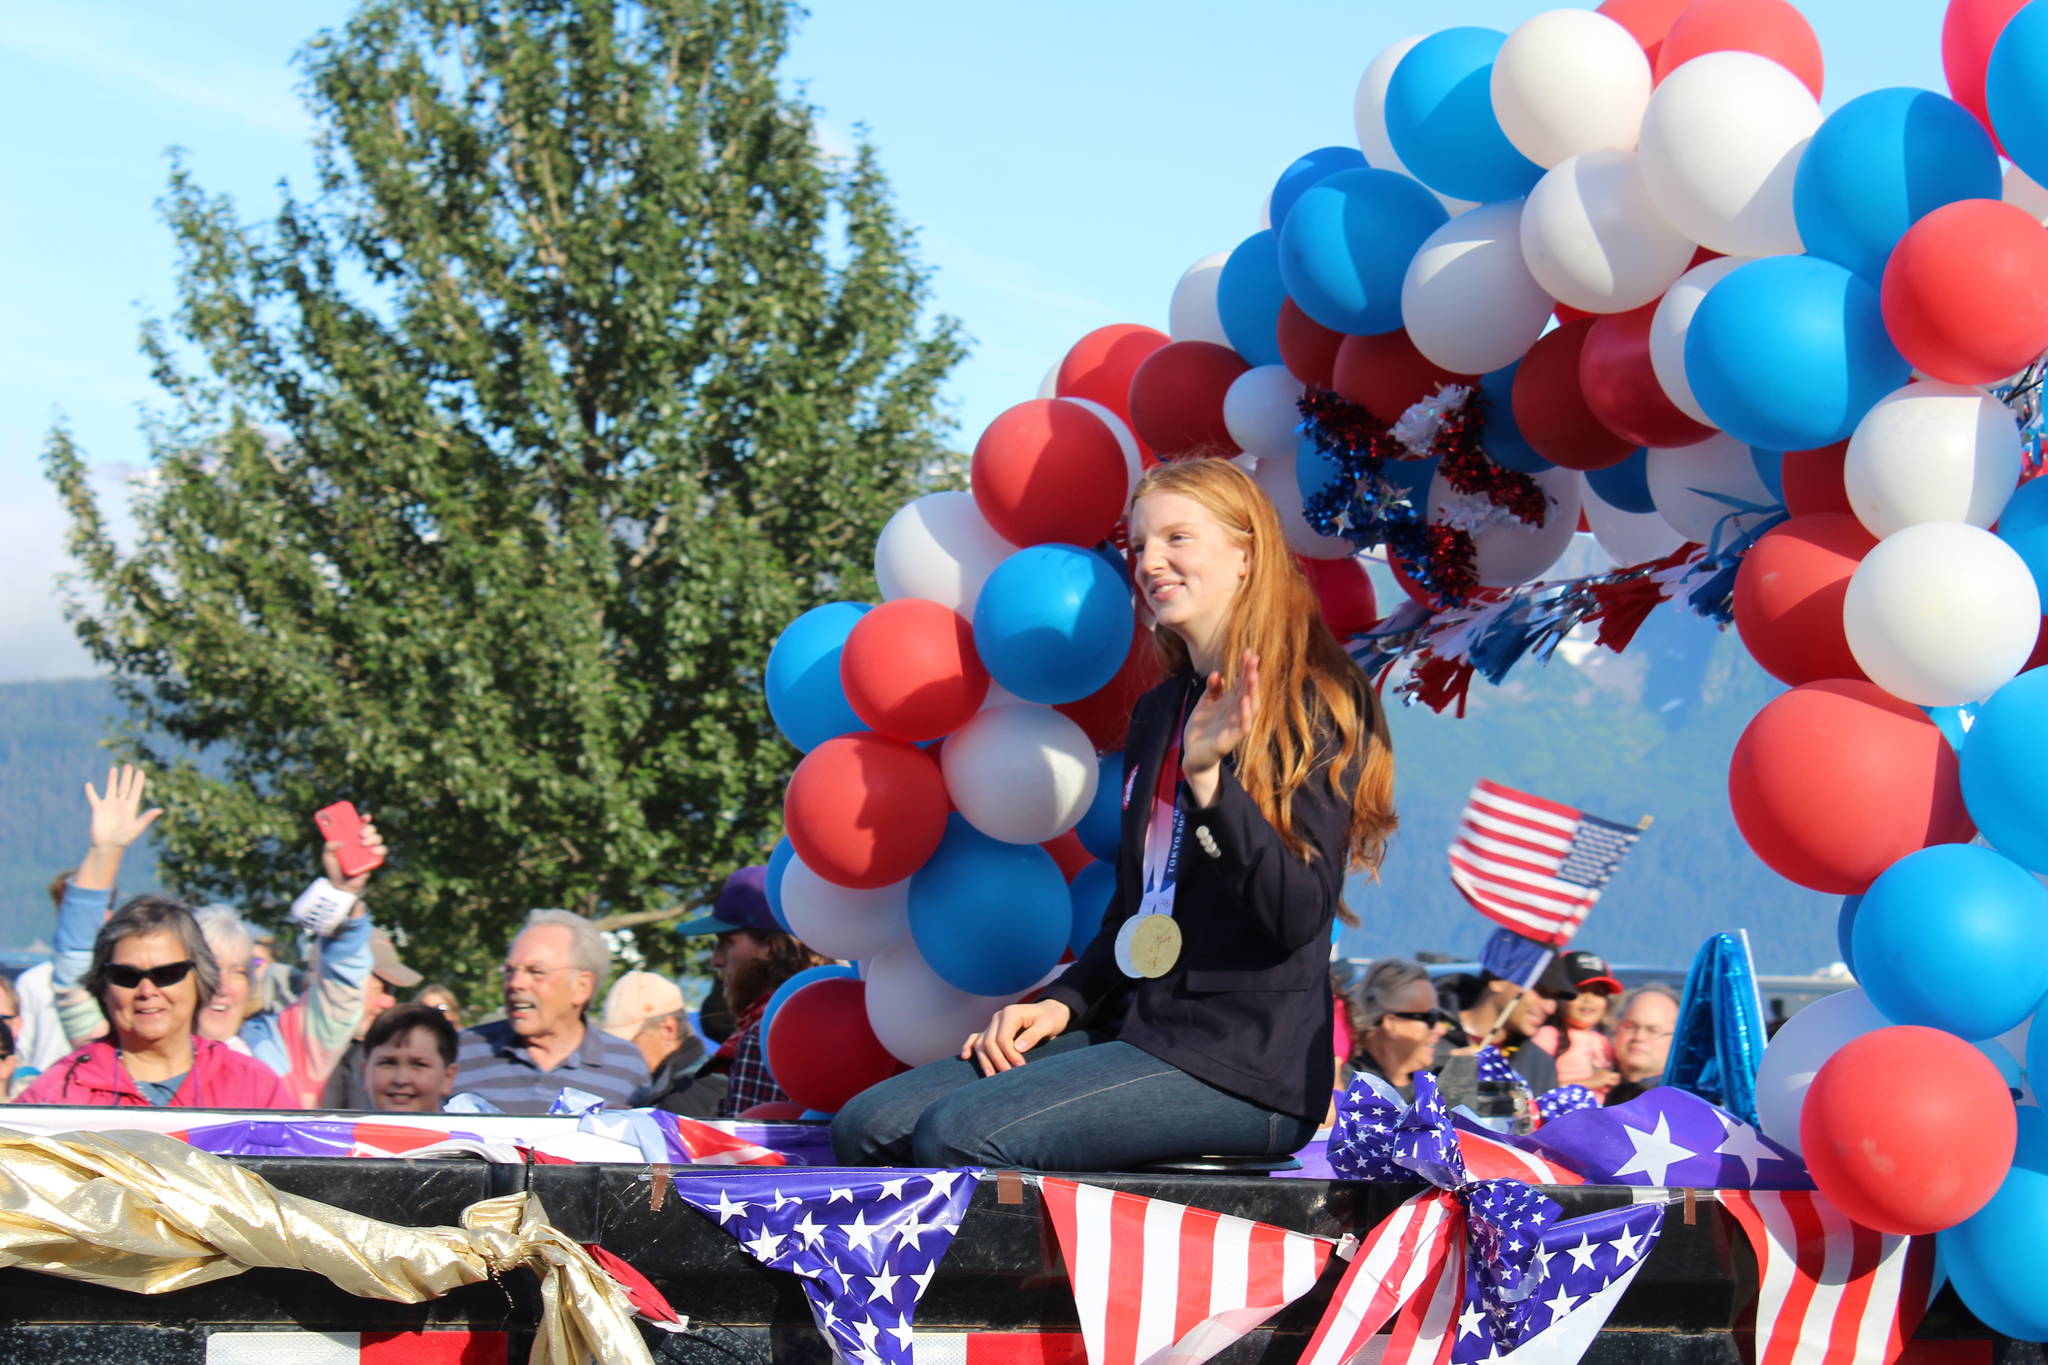 Ashlyn O’Hara/Peninsula Clarion
Olympic gold medalist Lydia Jacoby waves to the crowd in Seward during a celebratory parade on Aug. 5.